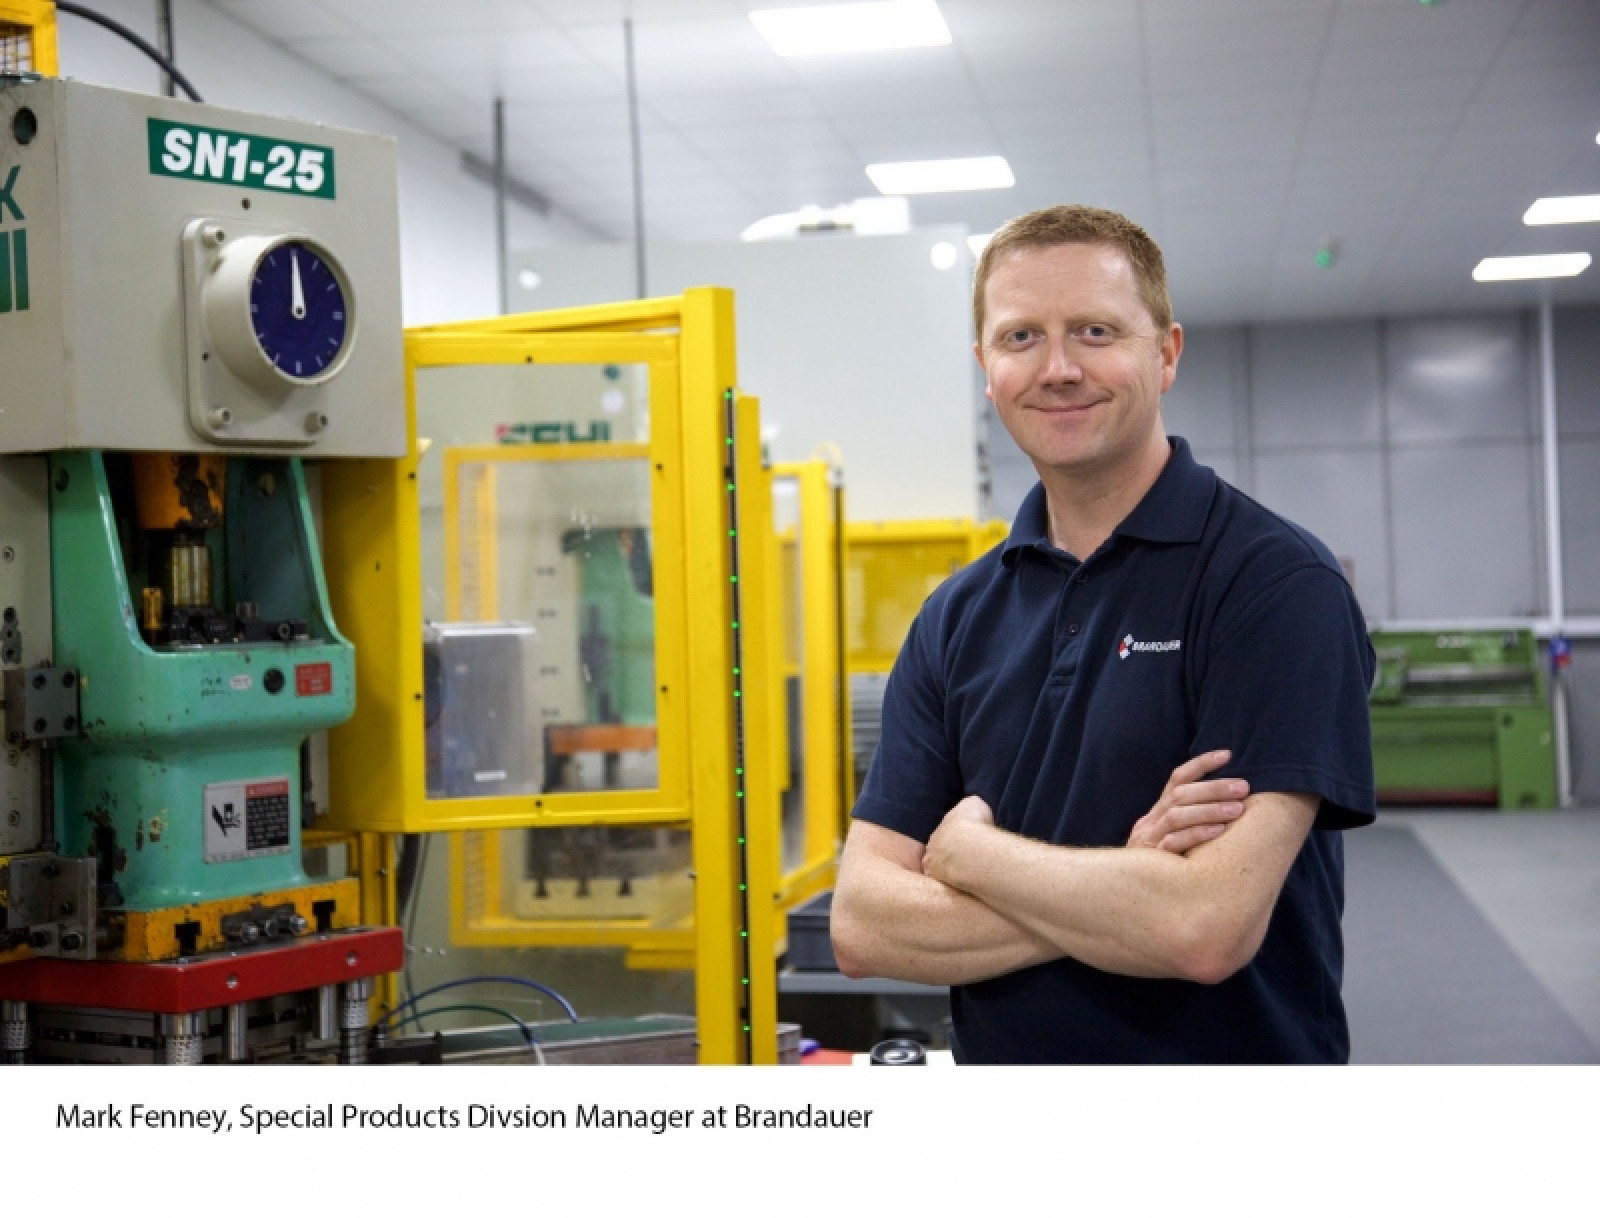 Brandauer lands new contracts after Special Produc...